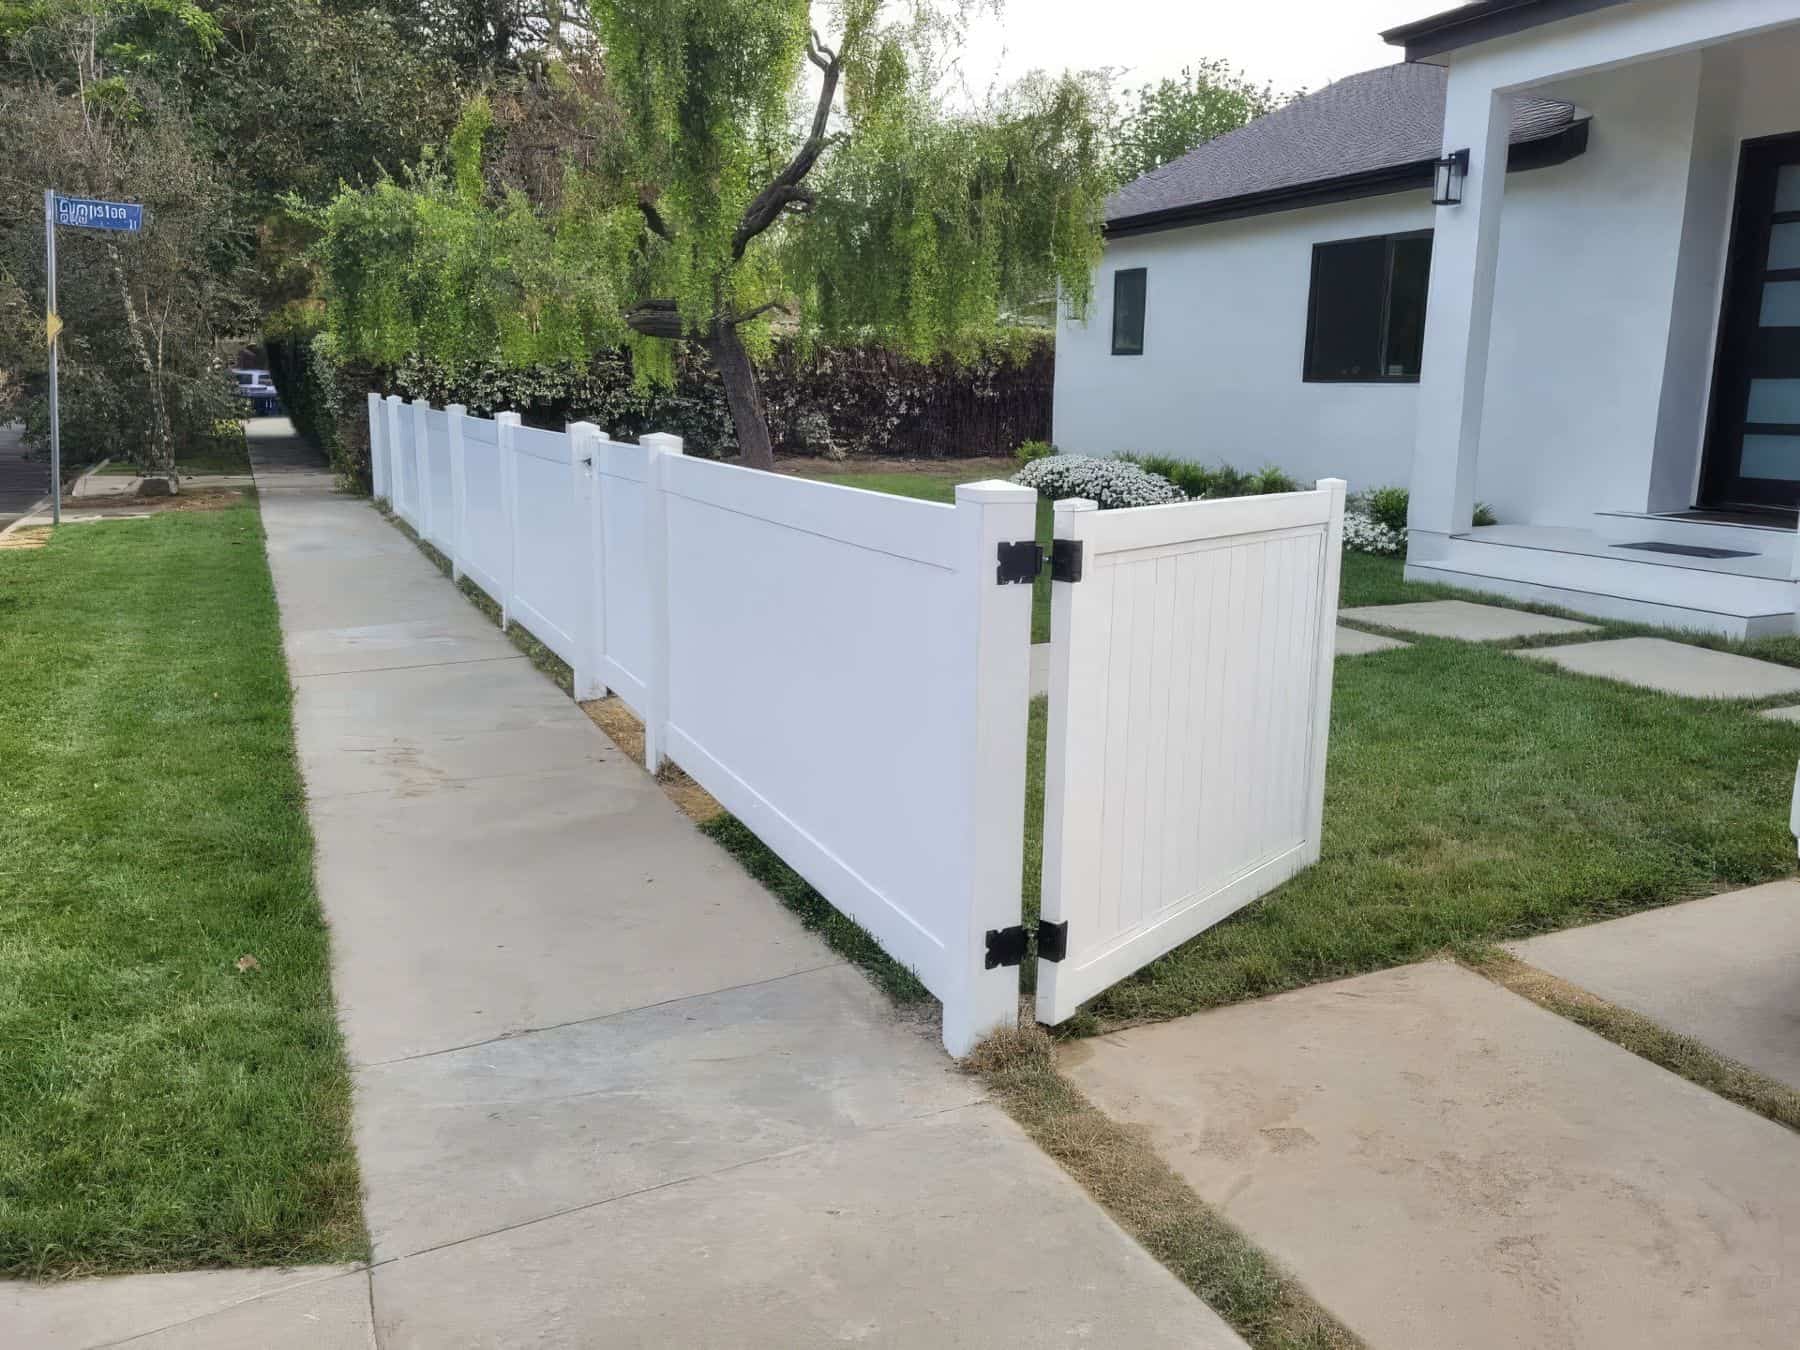 Vinyl driveway double gates, suburban home, clear sky, concrete sidewalk, lush front lawn, and trees in the background.